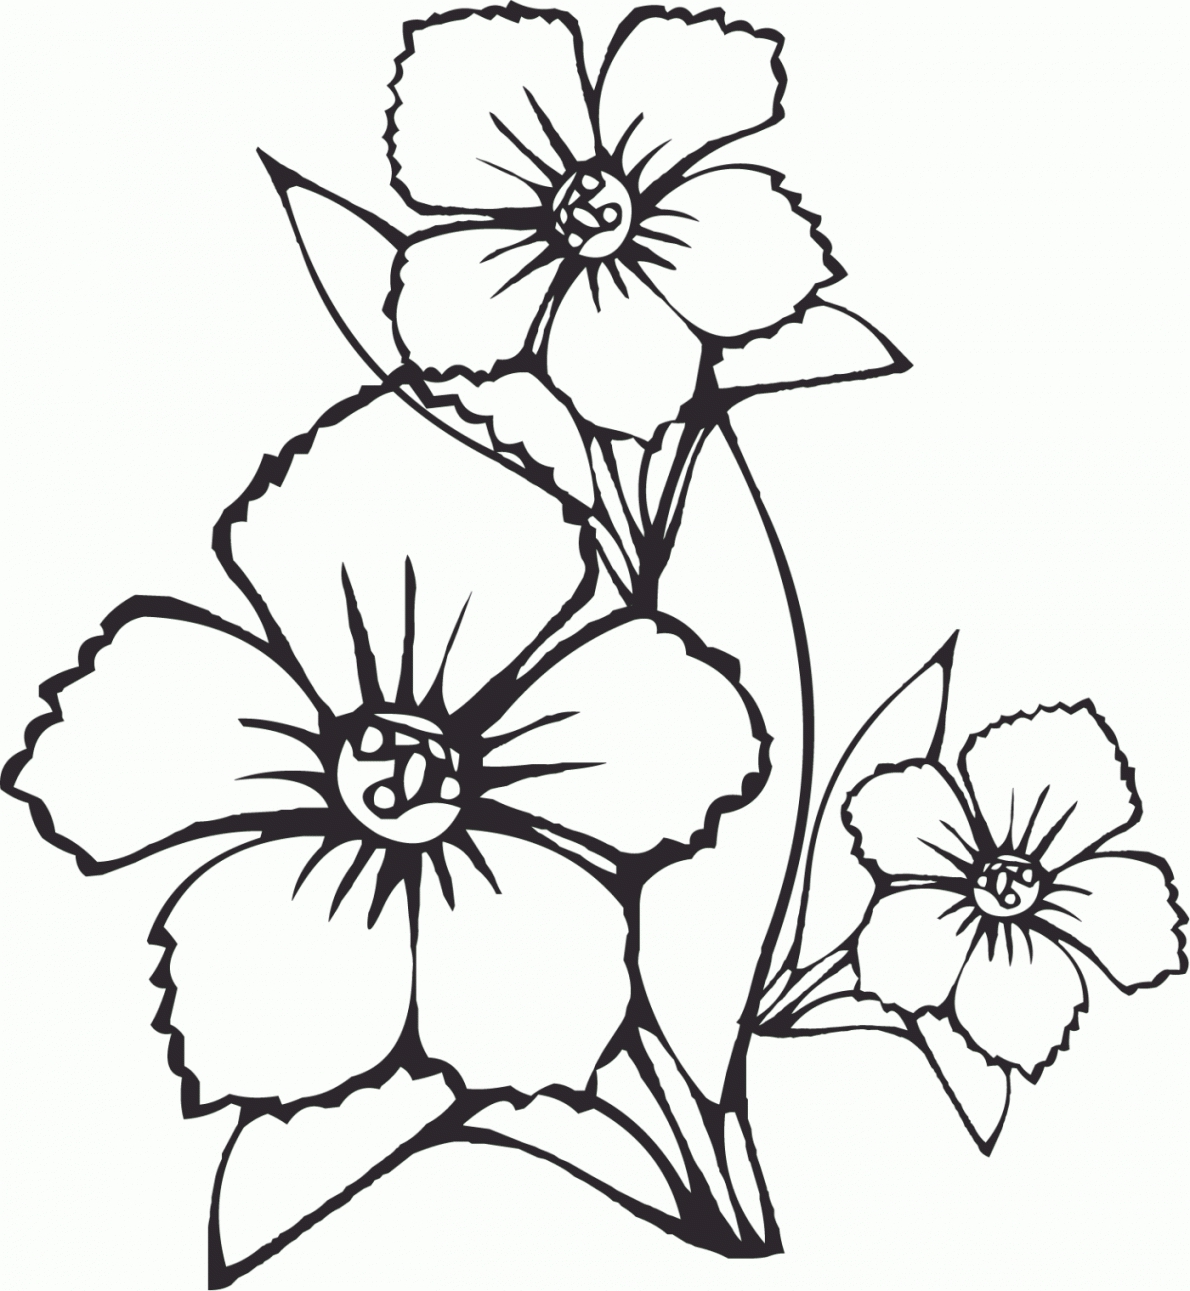 Realistic Flower Coloring Pages At Getcolorings.com | Free Printable